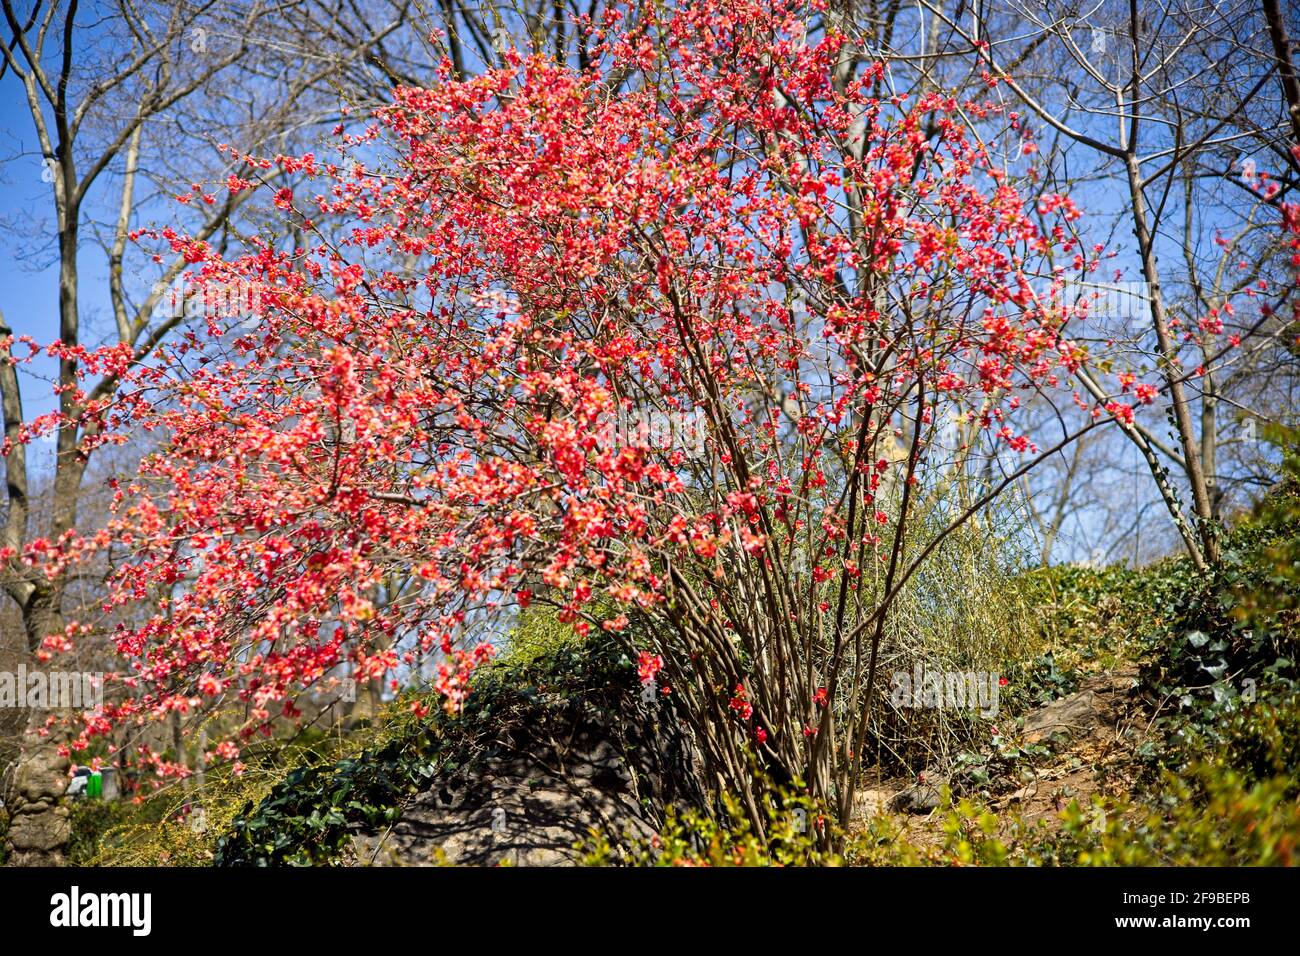 Red flowers on a tree beginning to bud on a hill with green foliage in the springtime Stock Photo